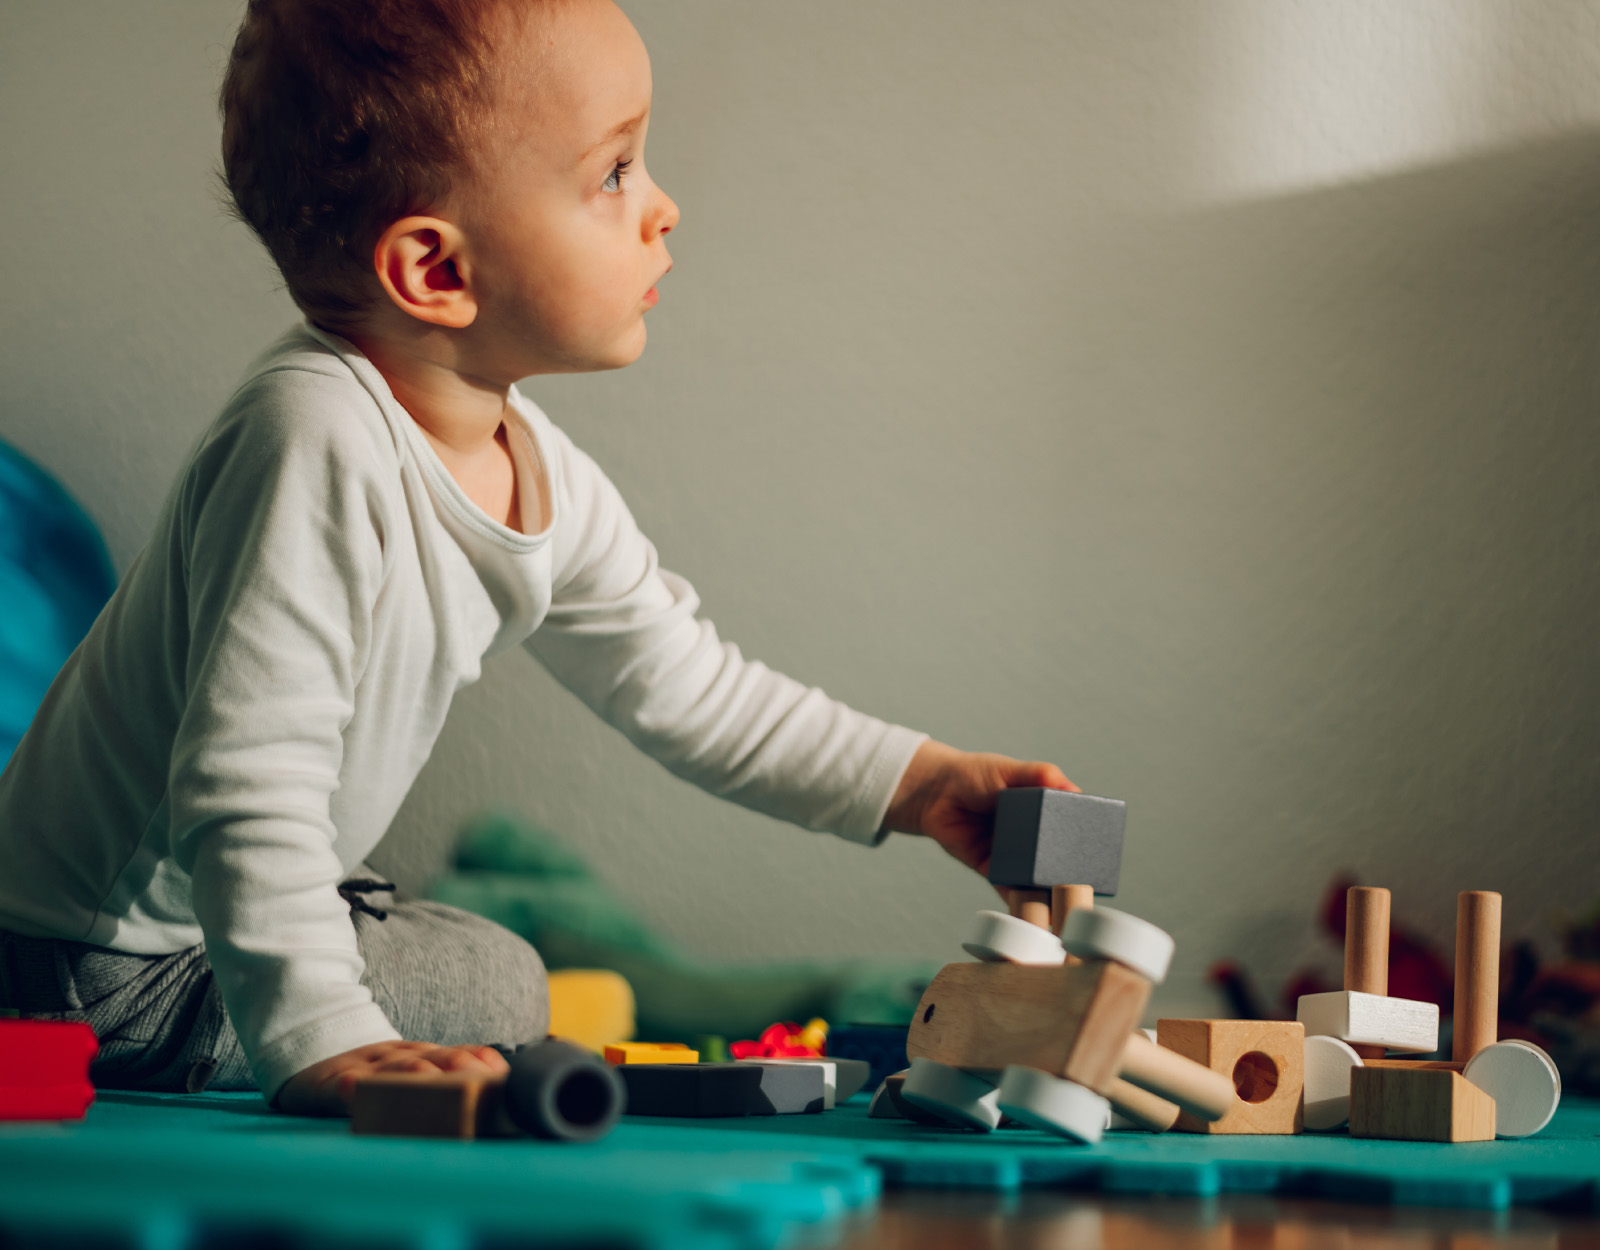 Ways to Foster Creativity and Play: The Key to Healthy Child Development